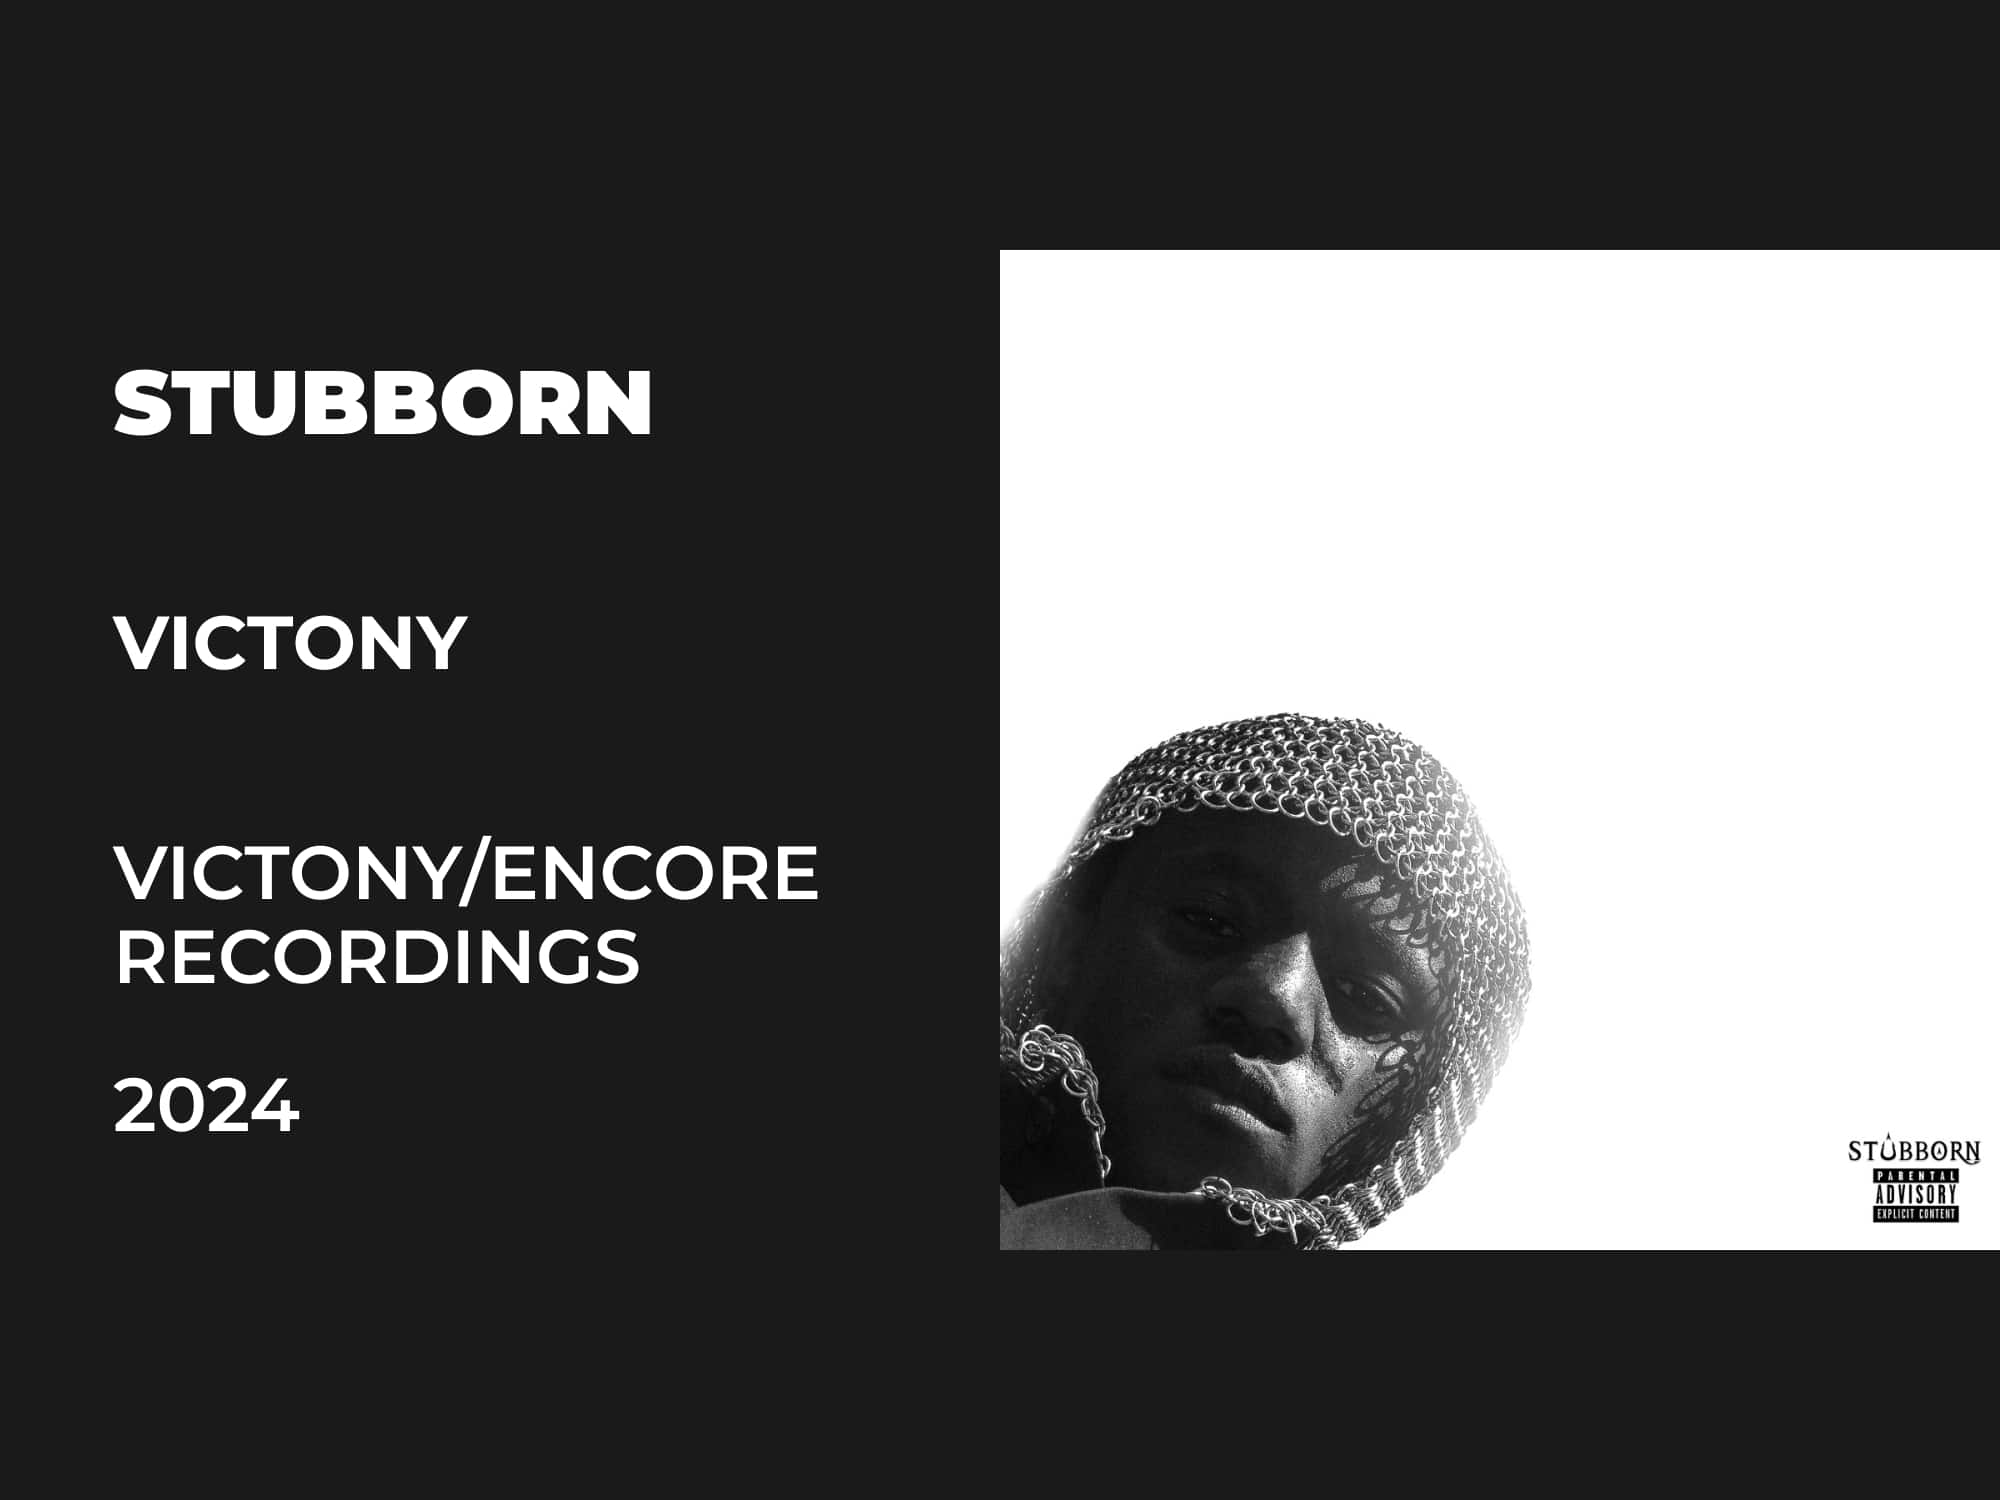 Review: ‘Stubborn’ by Victony